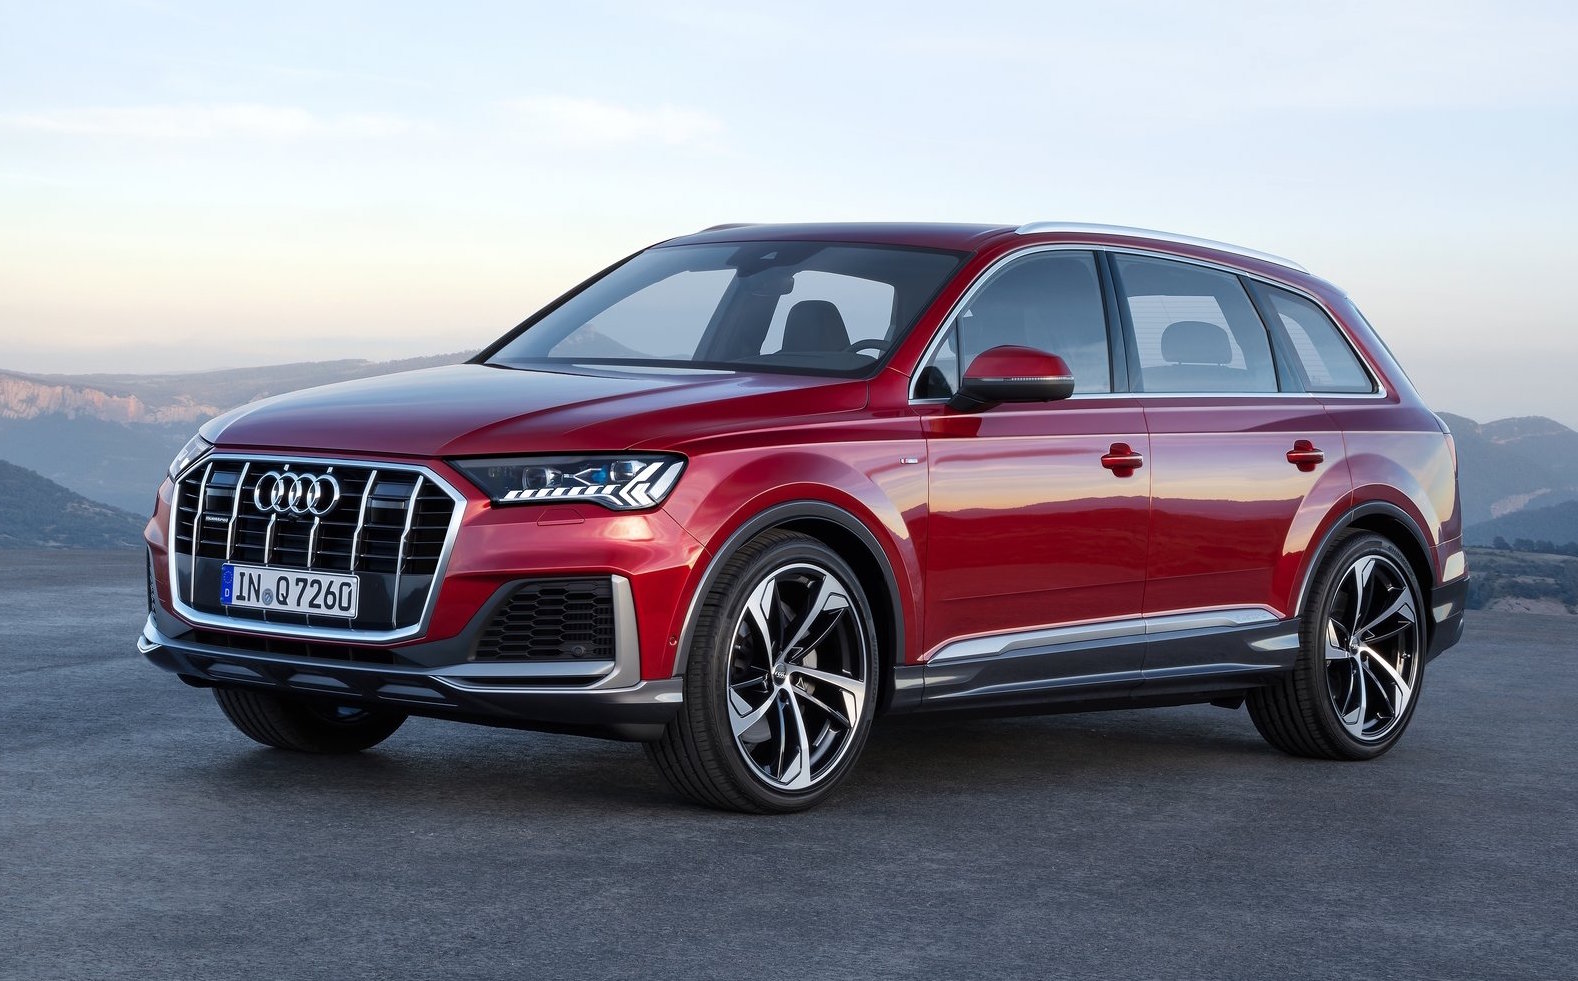 2020 Audi Q7 facelift revealed with sharpened design and technology